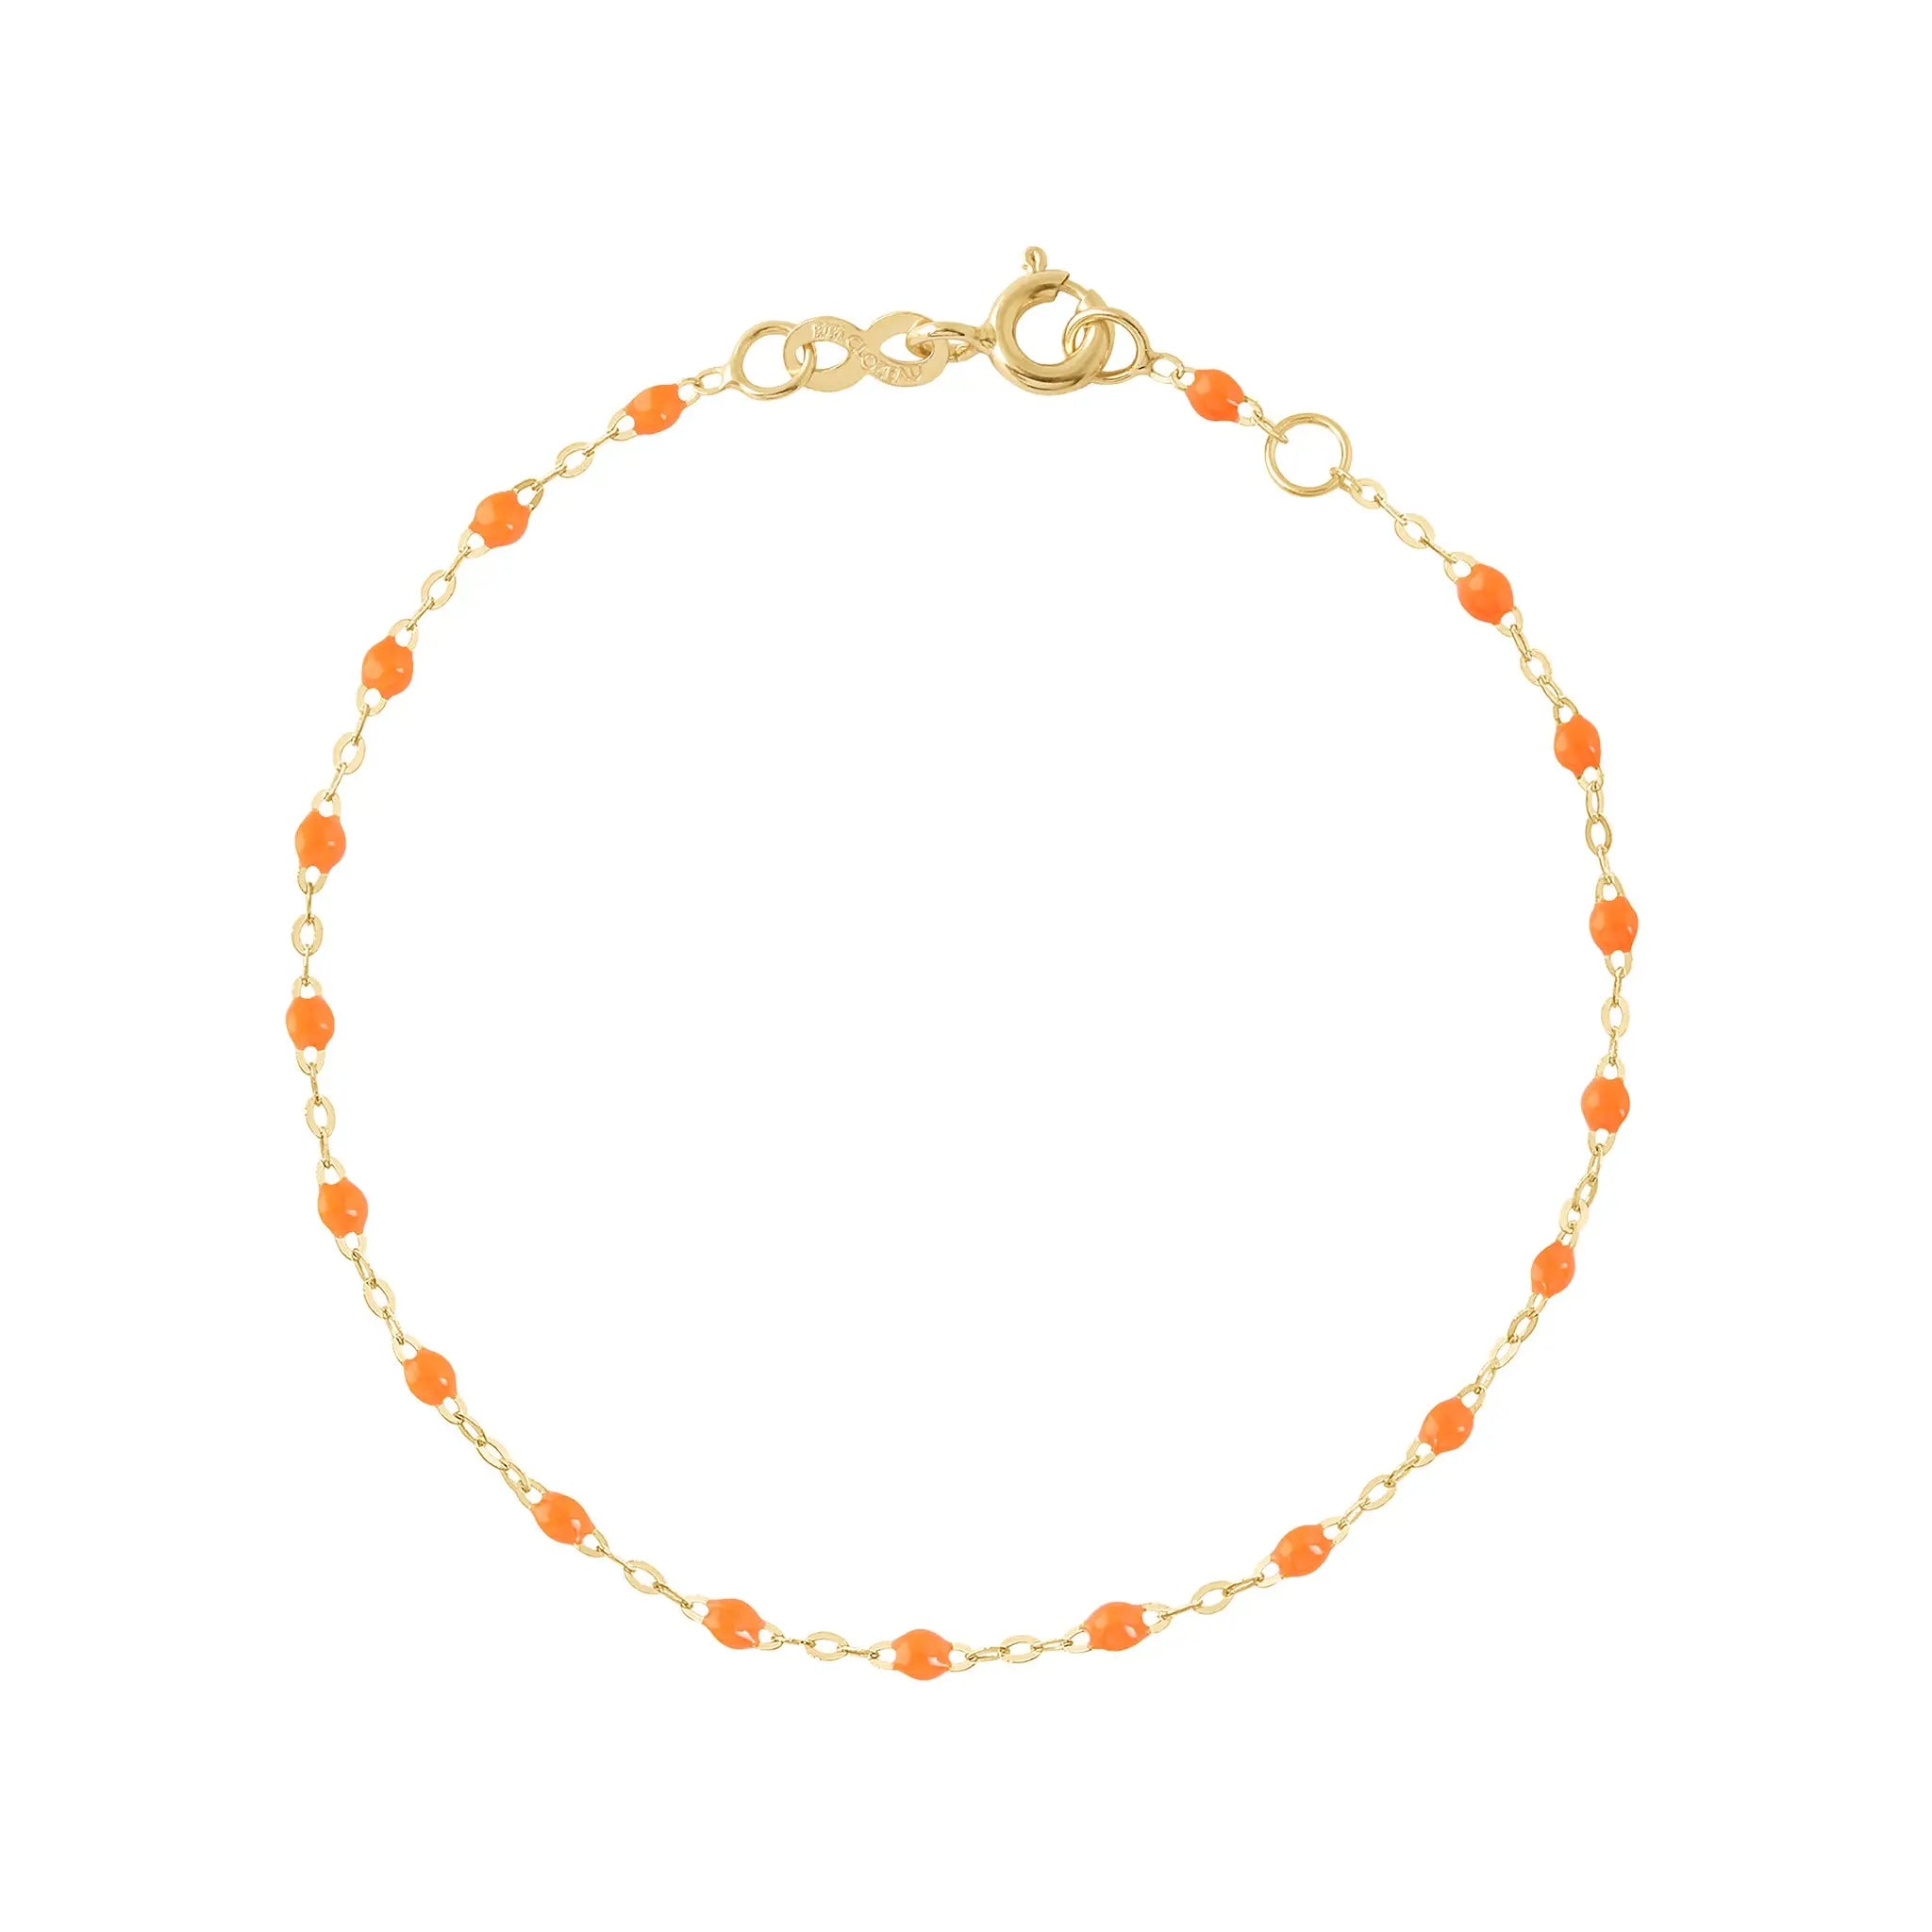 The Classic Gigi bracelet by gigi CLOZEAU features 18K Yellow Gold, and unique Orange jewels for a simple, everyday look.   Each jewel is unique, artisanally made in their family-owned workshop. 18K yellow gold and resin. The bracelet measures 6.7 inches with adjustable clasp at 6.3 inches.